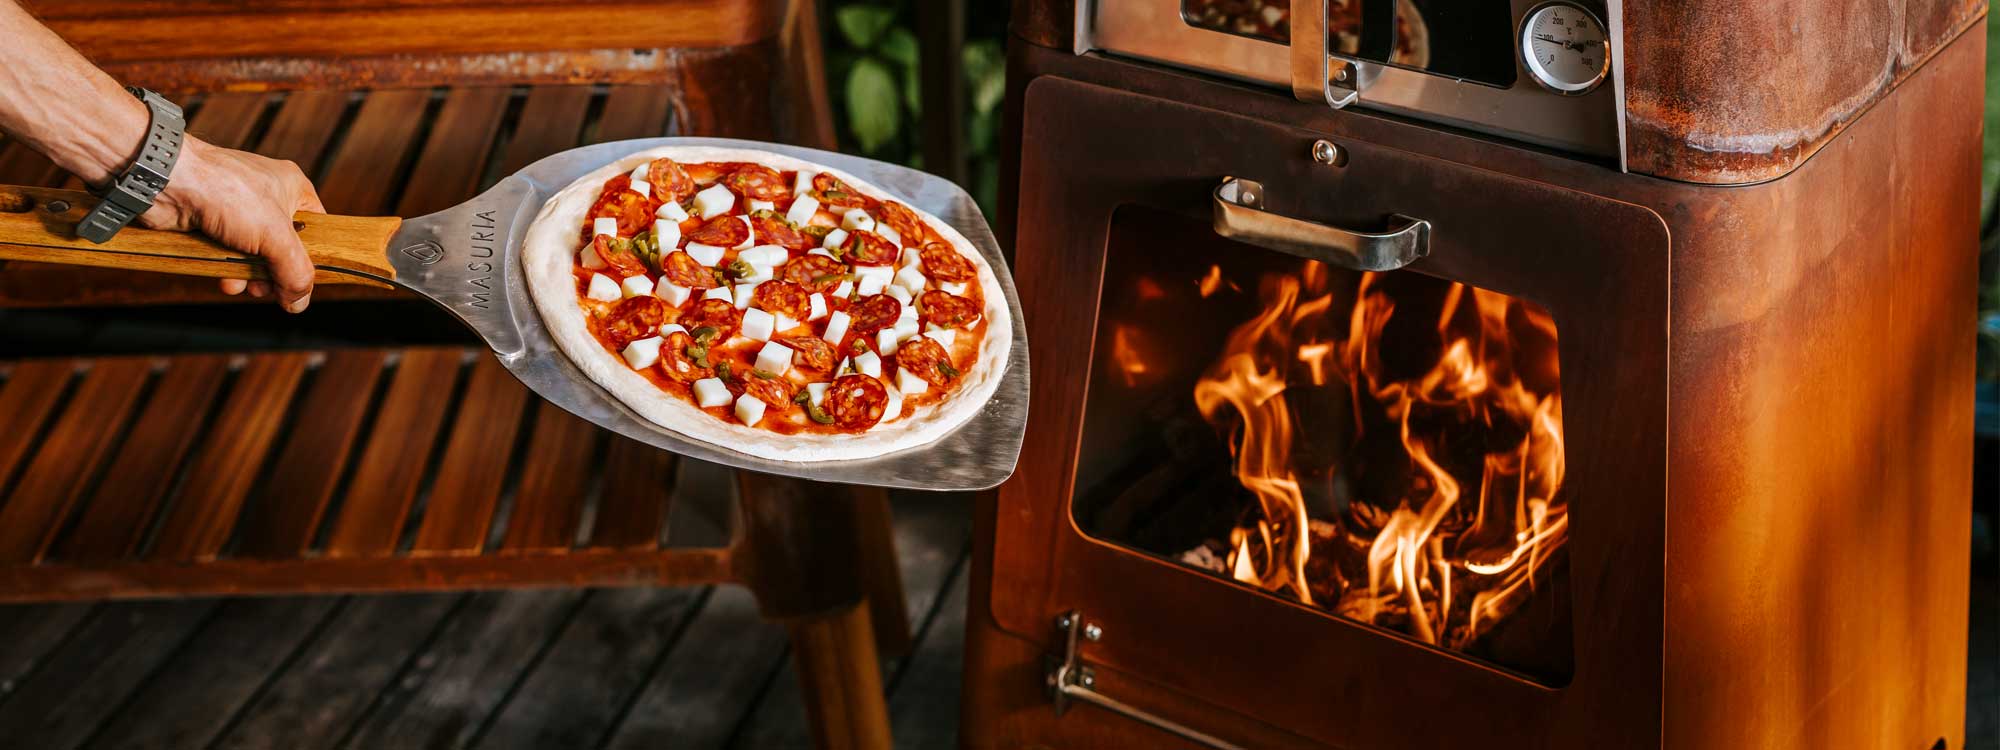 Image of man 's arm holding a pizza paddle with a pizza ready to be placed inside M-Classic wood-fired pizza oven